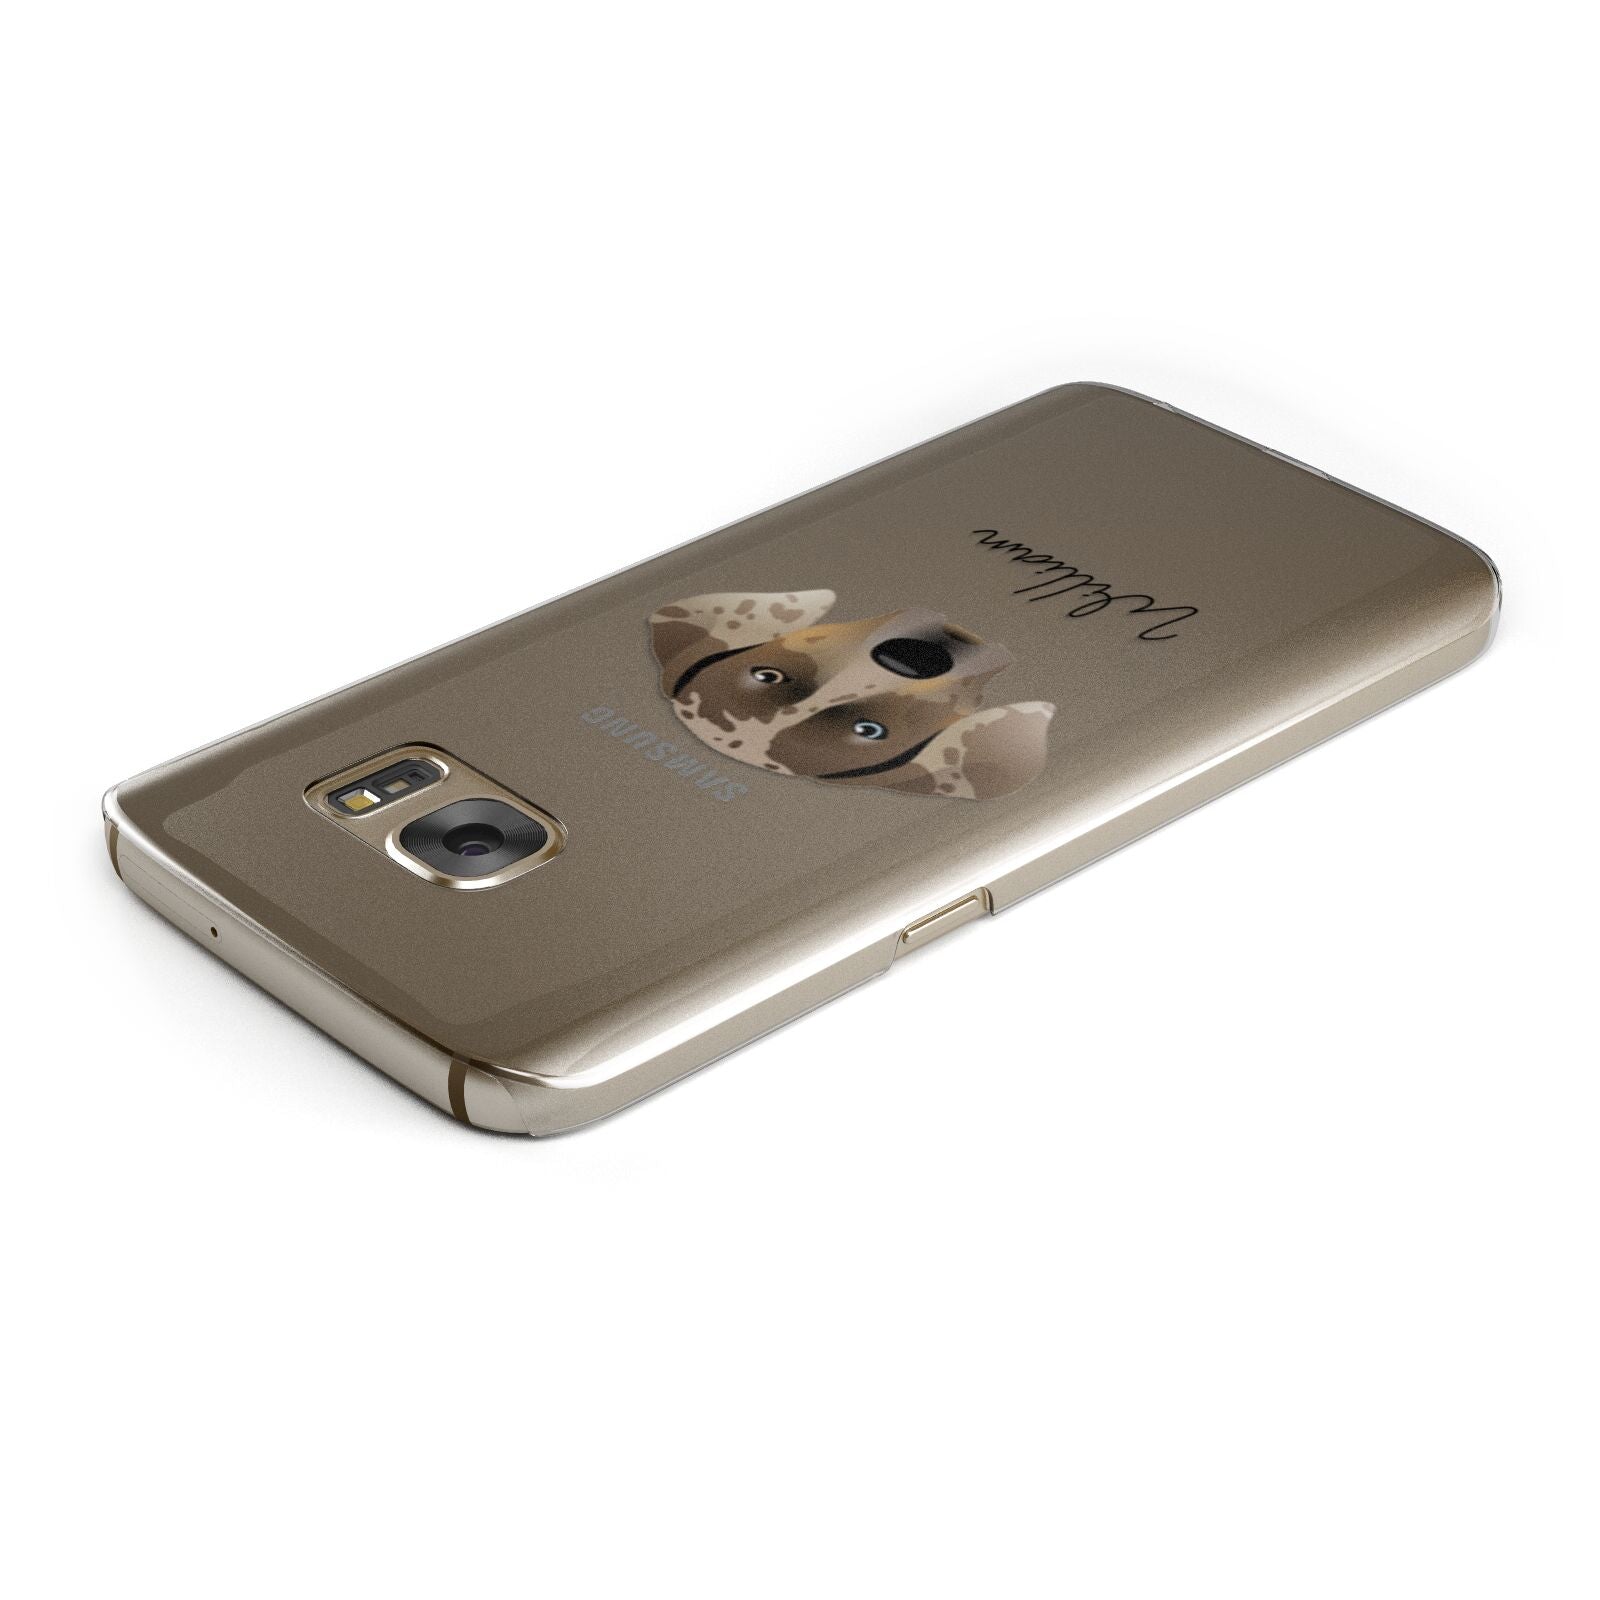 Catahoula Leopard Dog Personalised Samsung Galaxy Case Top Cutout